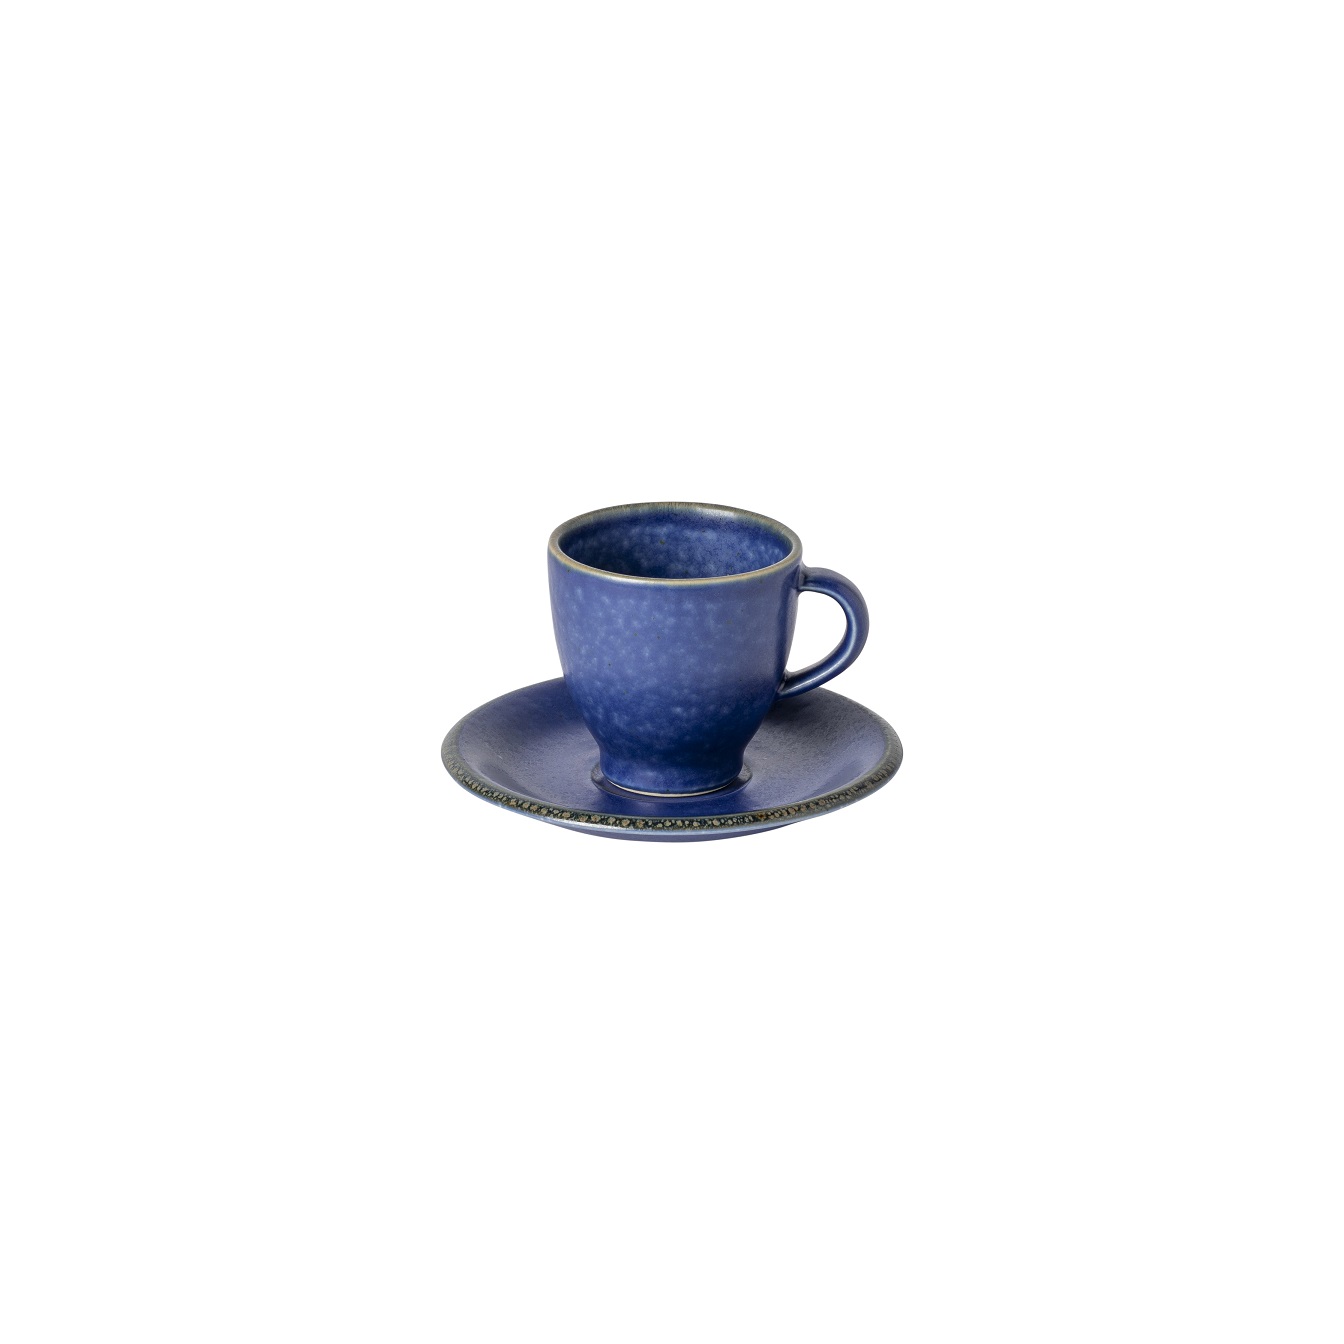 Positano Blue Coffee Cup & Saucer 0.08l Gift